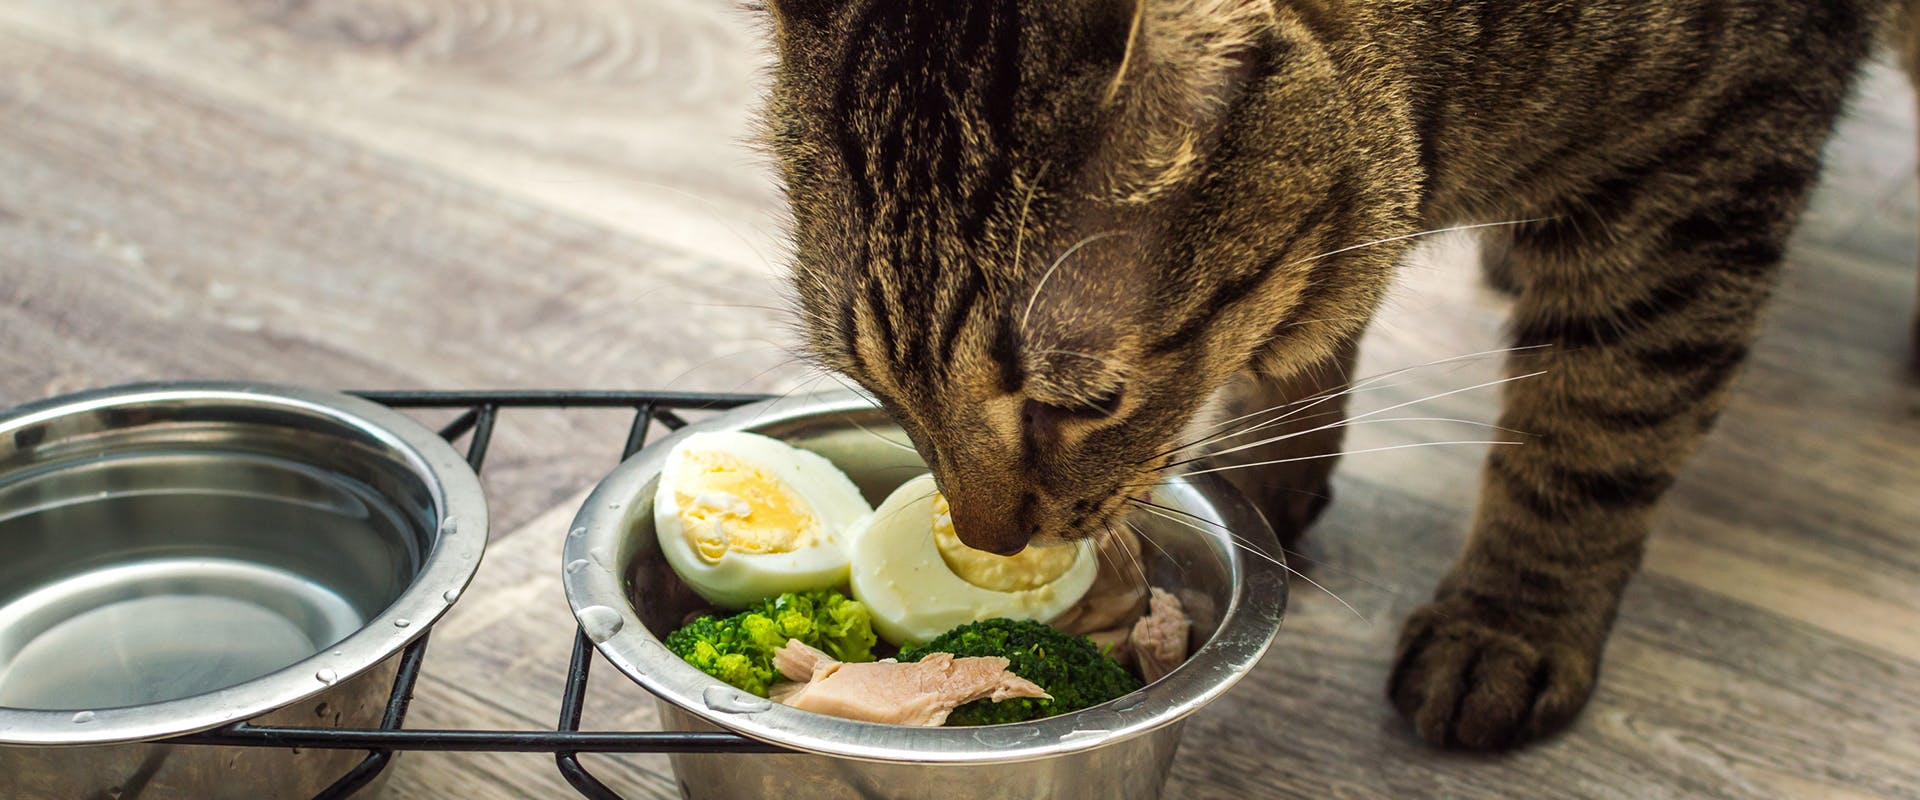 Can cats eat eggs? A cat eating a bowl of food, containing a hard boiled egg